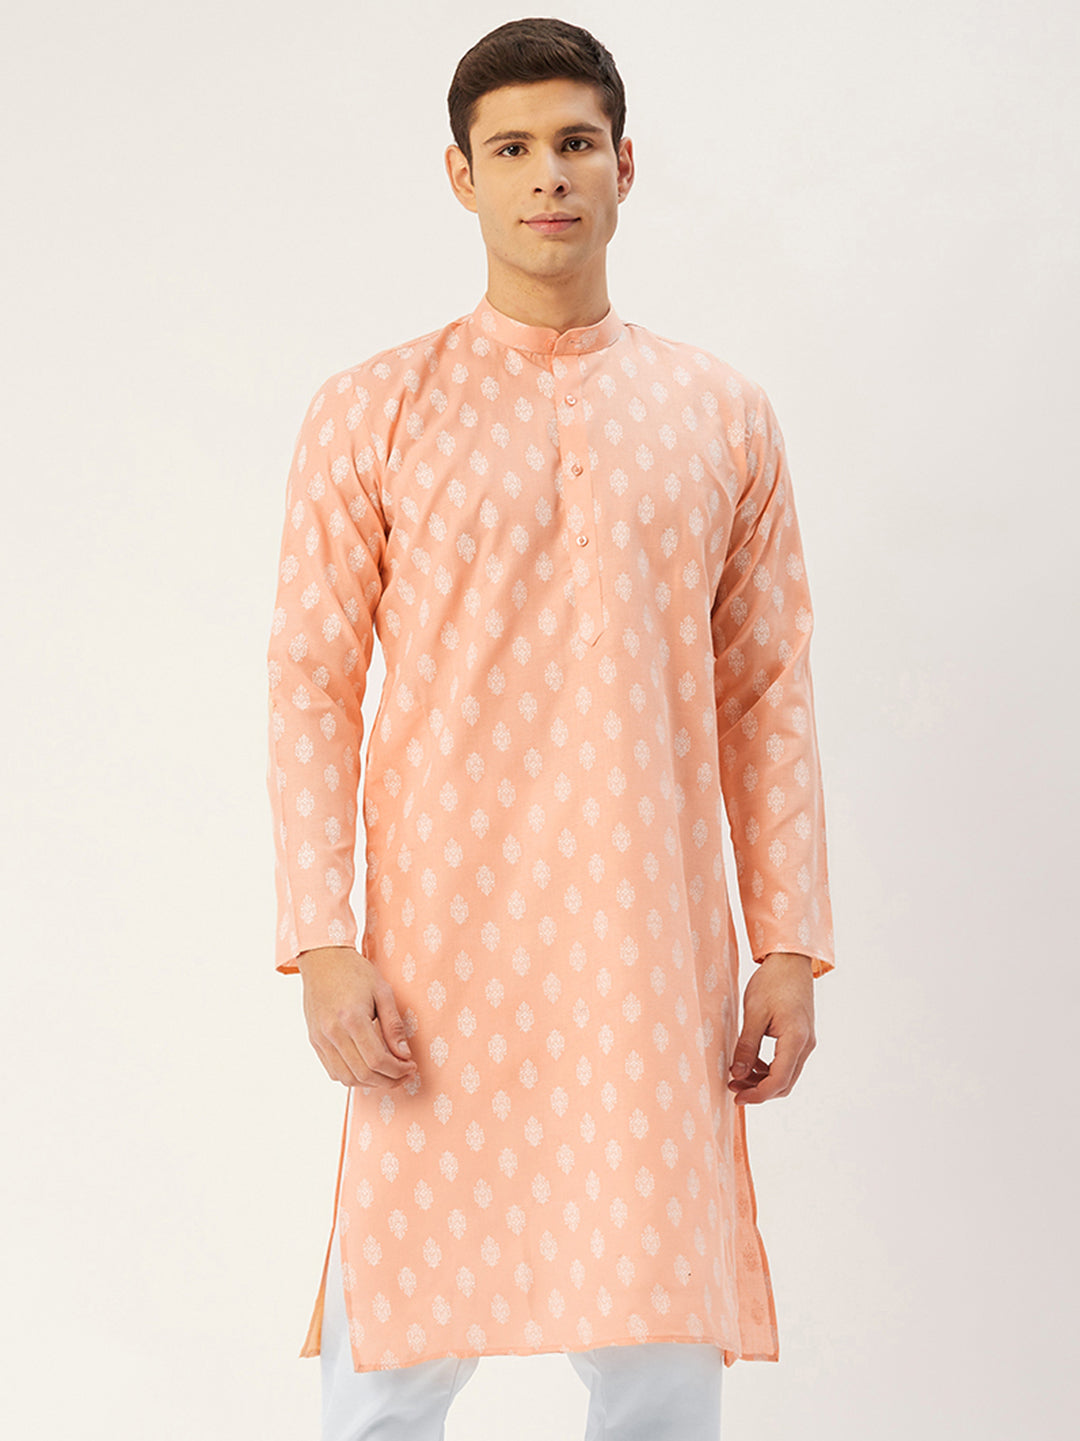 Jompers Men's Peach Cotton Floral printed kurta Only